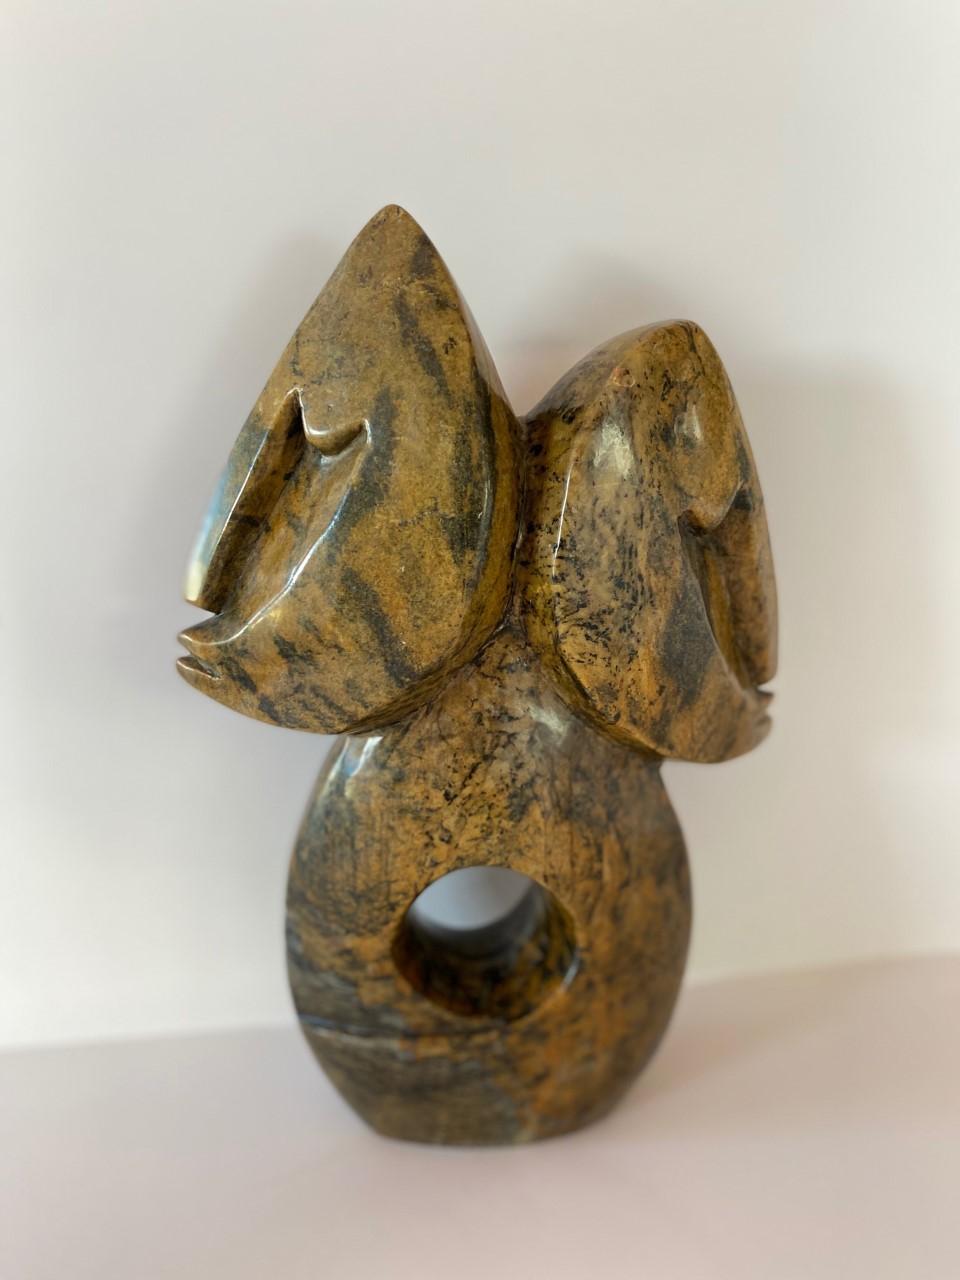 Incredible abstract sculpture by Tafadzwa Tandi made out of a solid piece of serpentine stone. A 3rd generation artist of Zimbabwe, Tafadzwa learned the language of stone by his father, pushing his craft and talent to be bolder and more daring. This